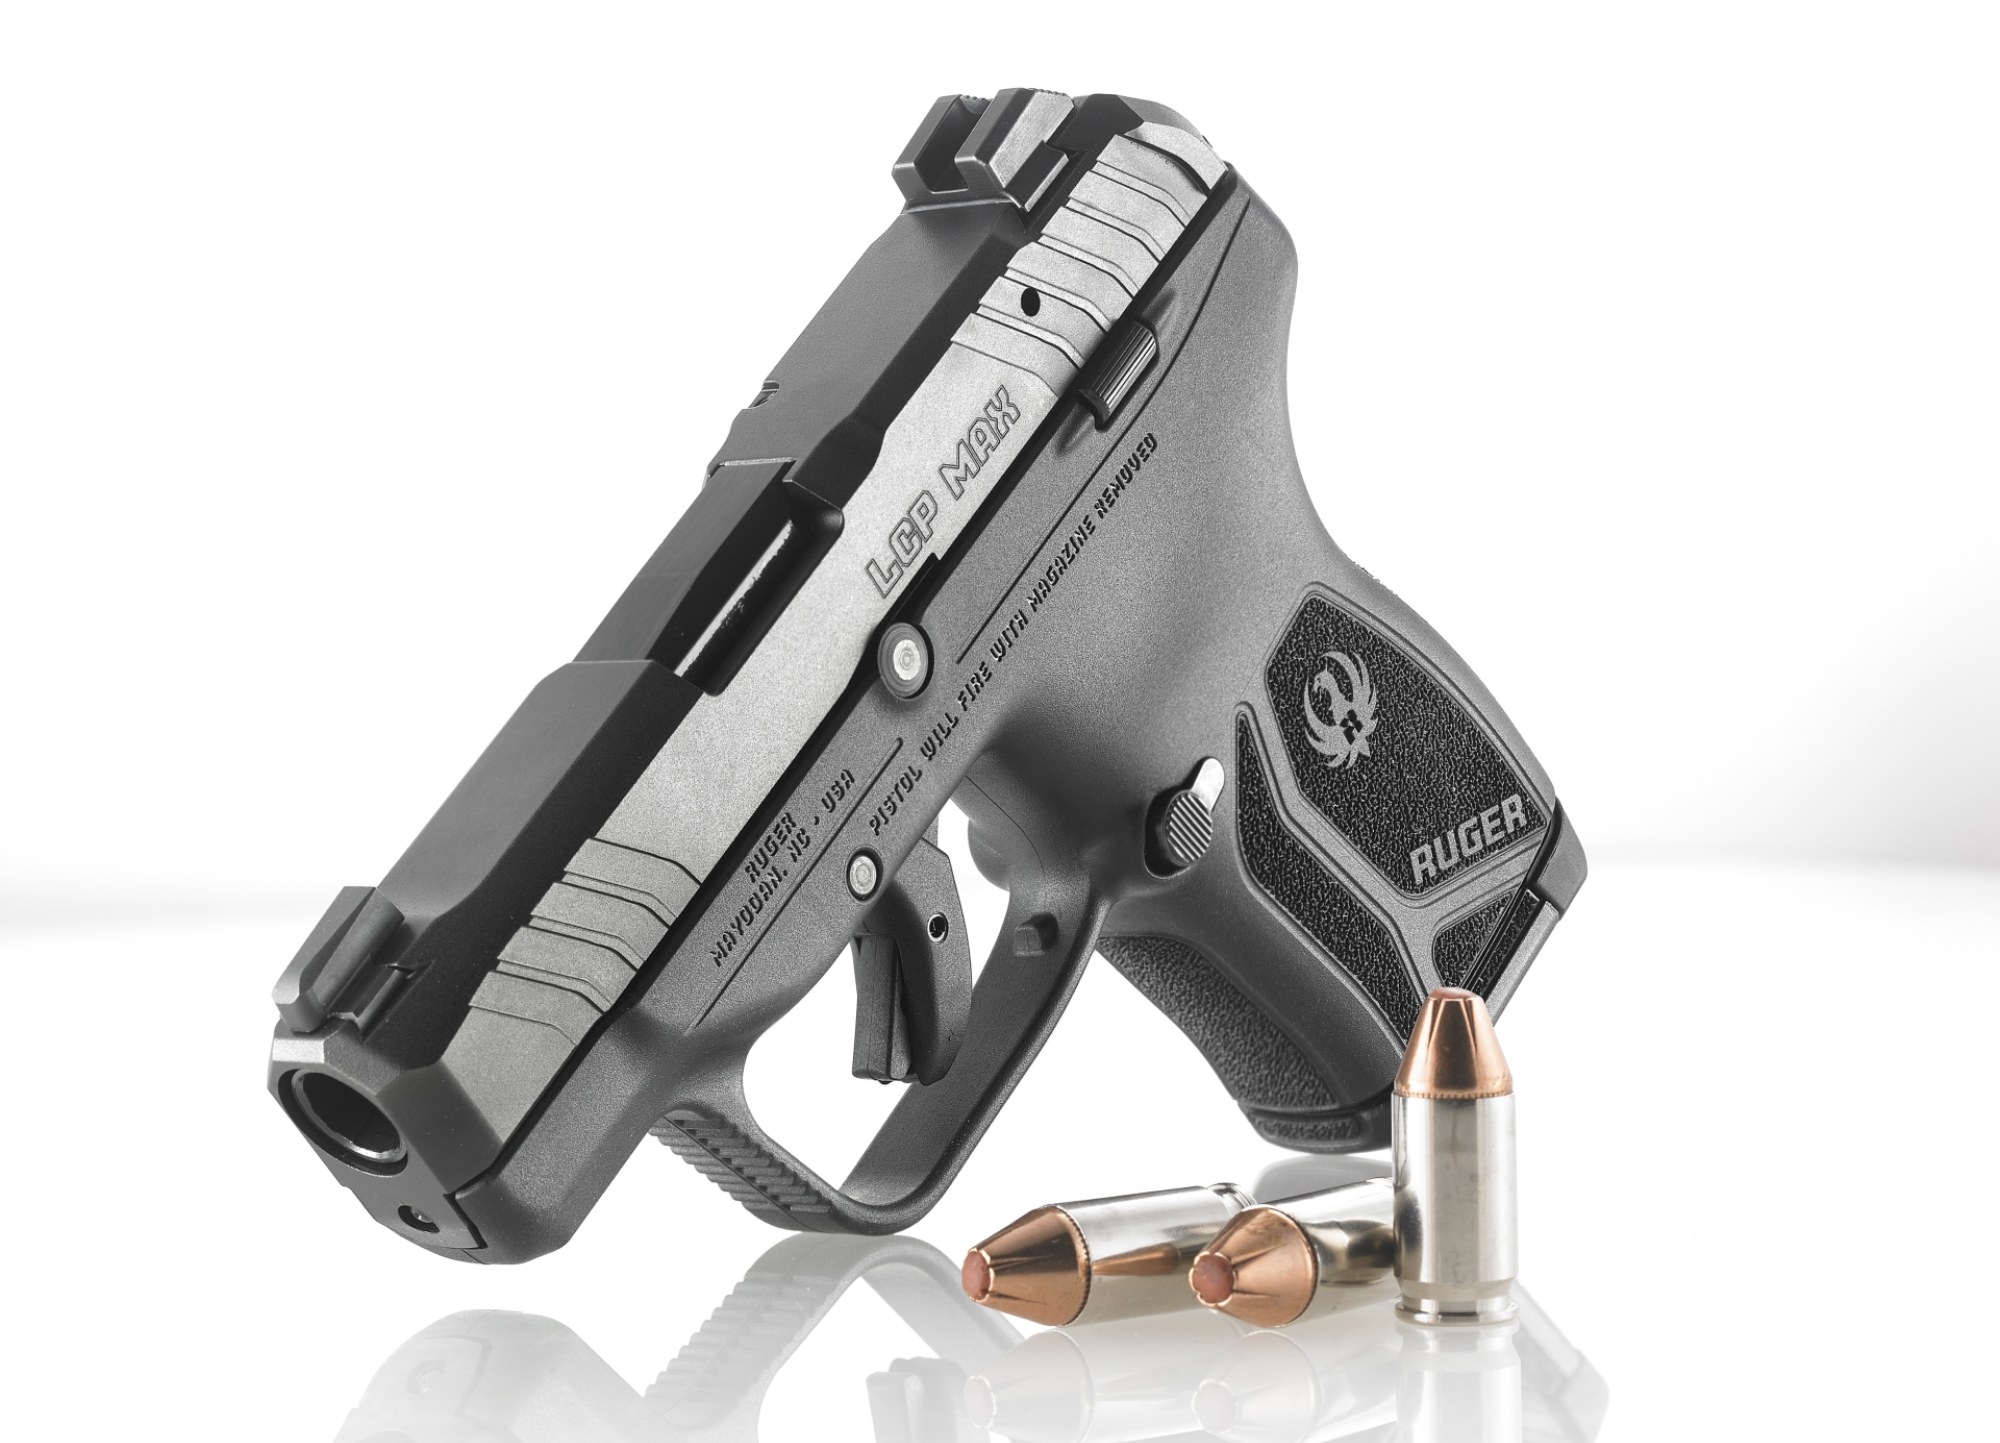 The new Ruger LCP MAX Pistol